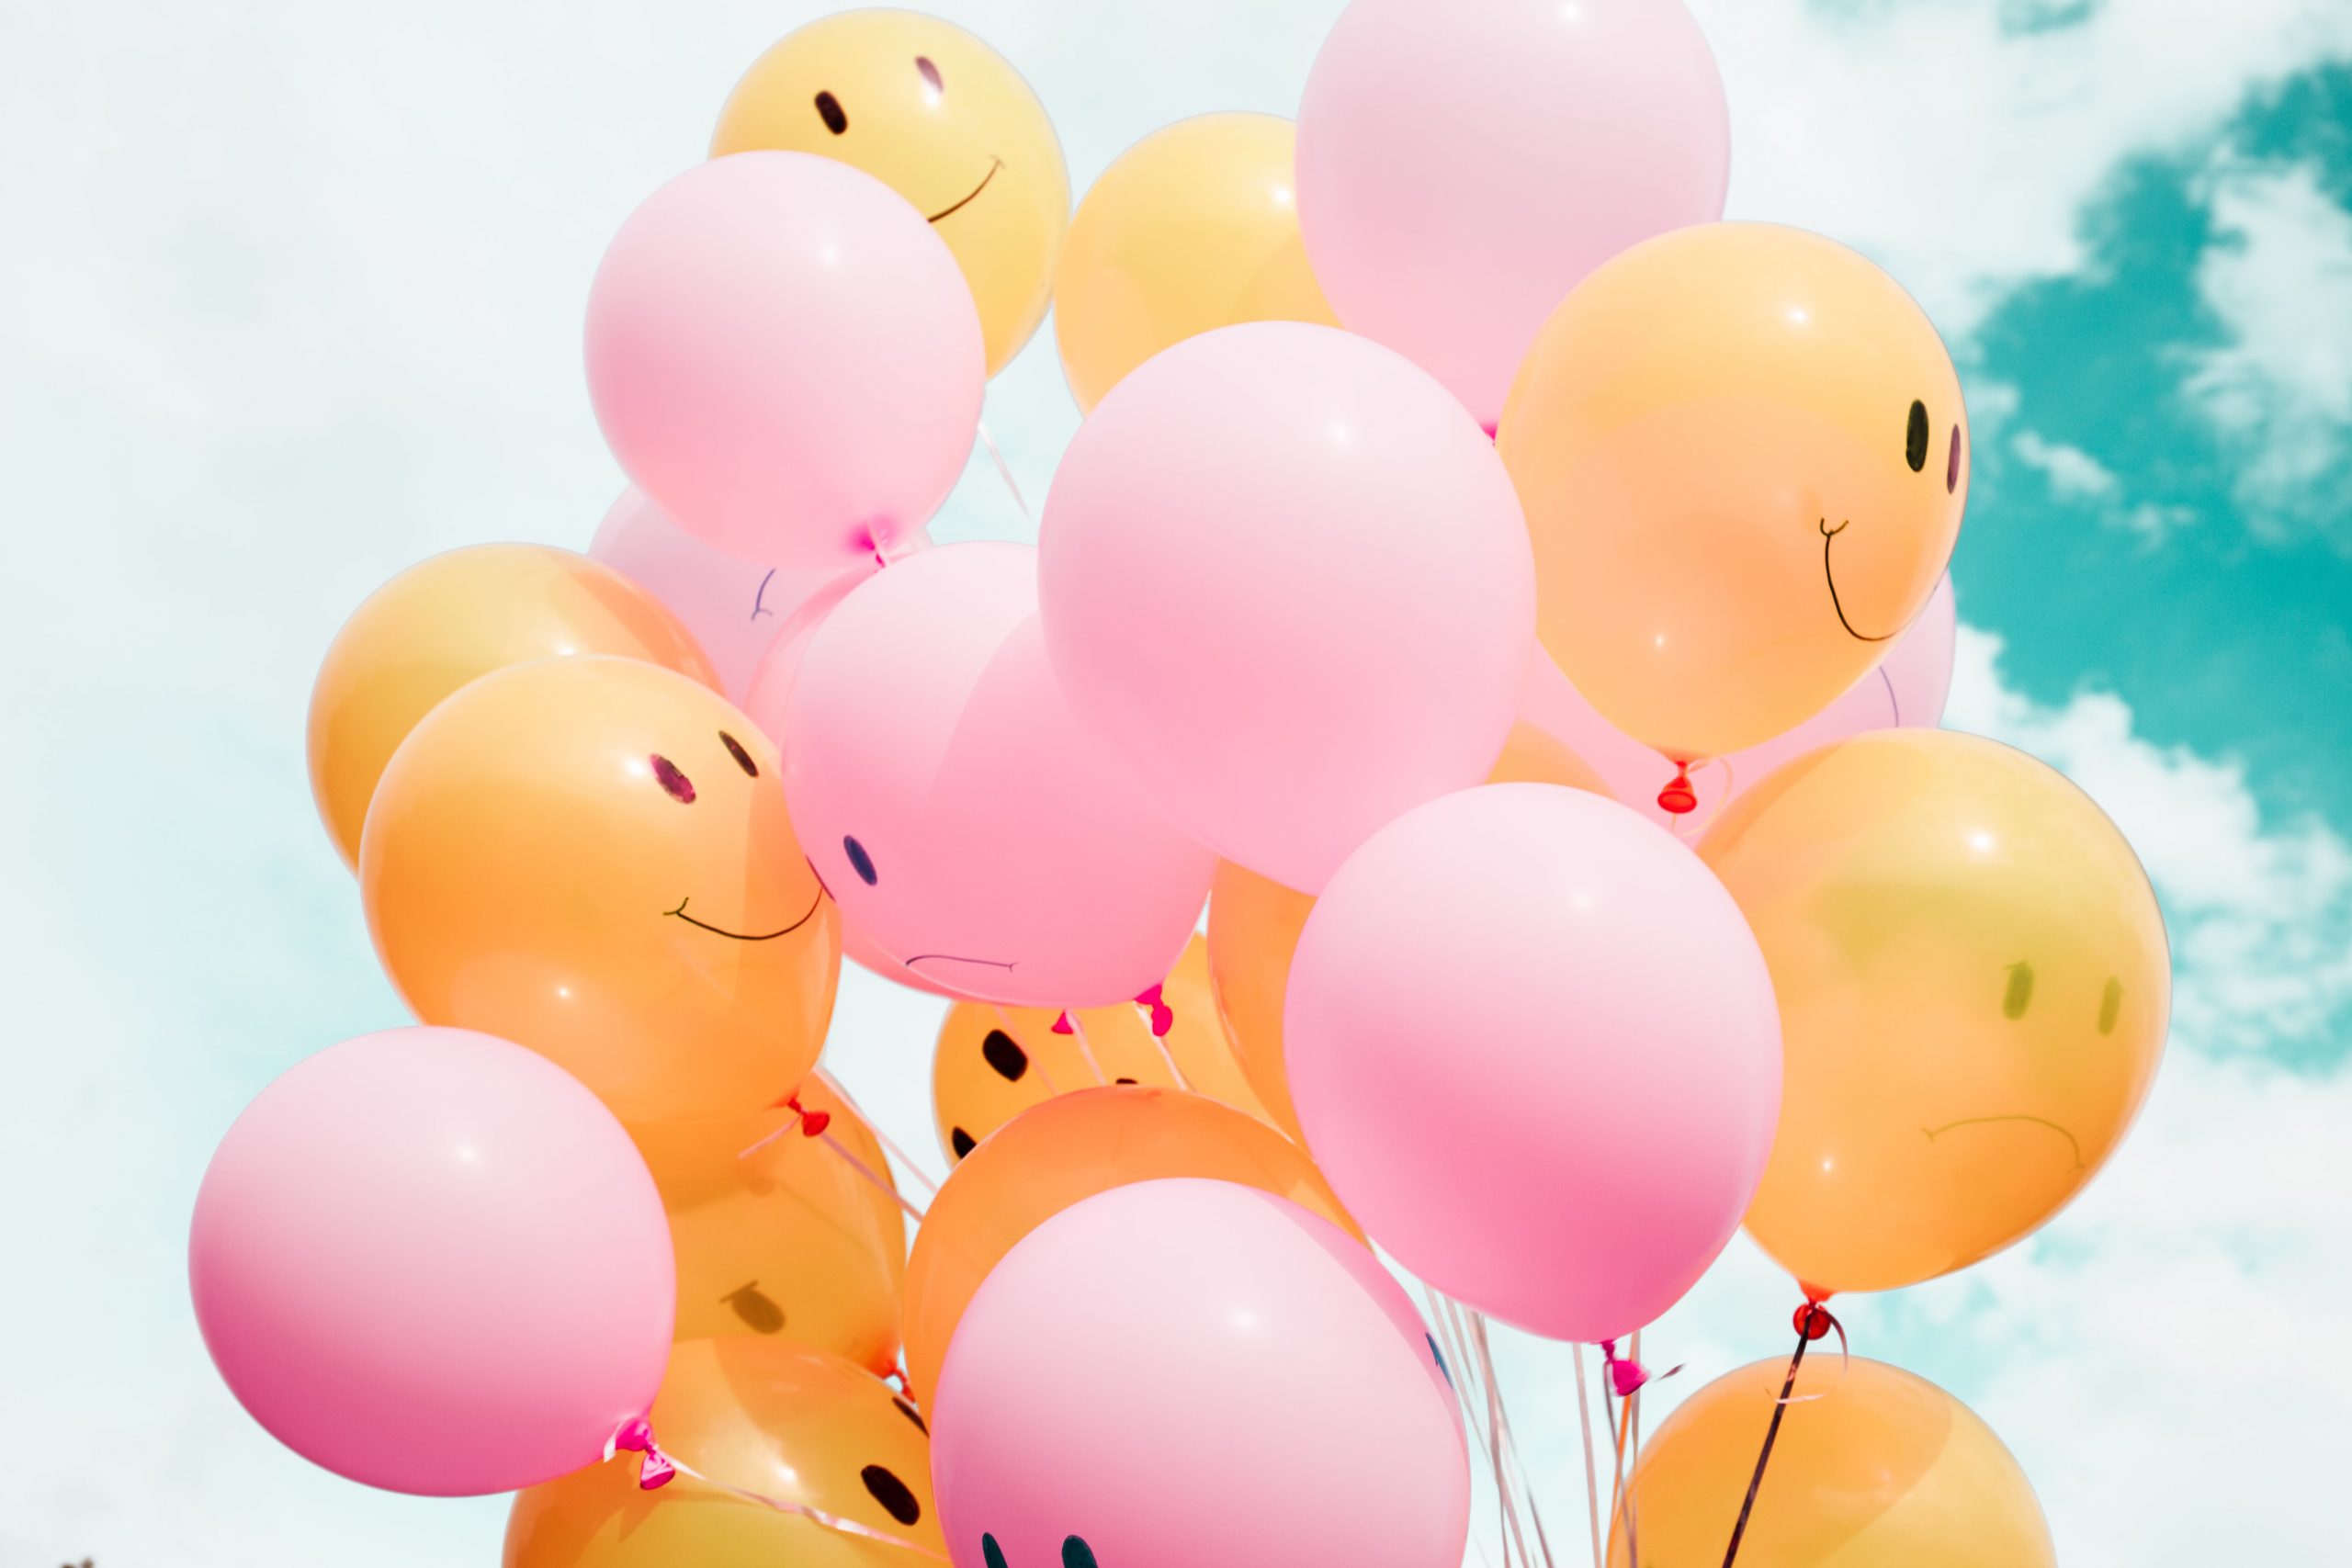 Pink and yellow balloons floating in the sky